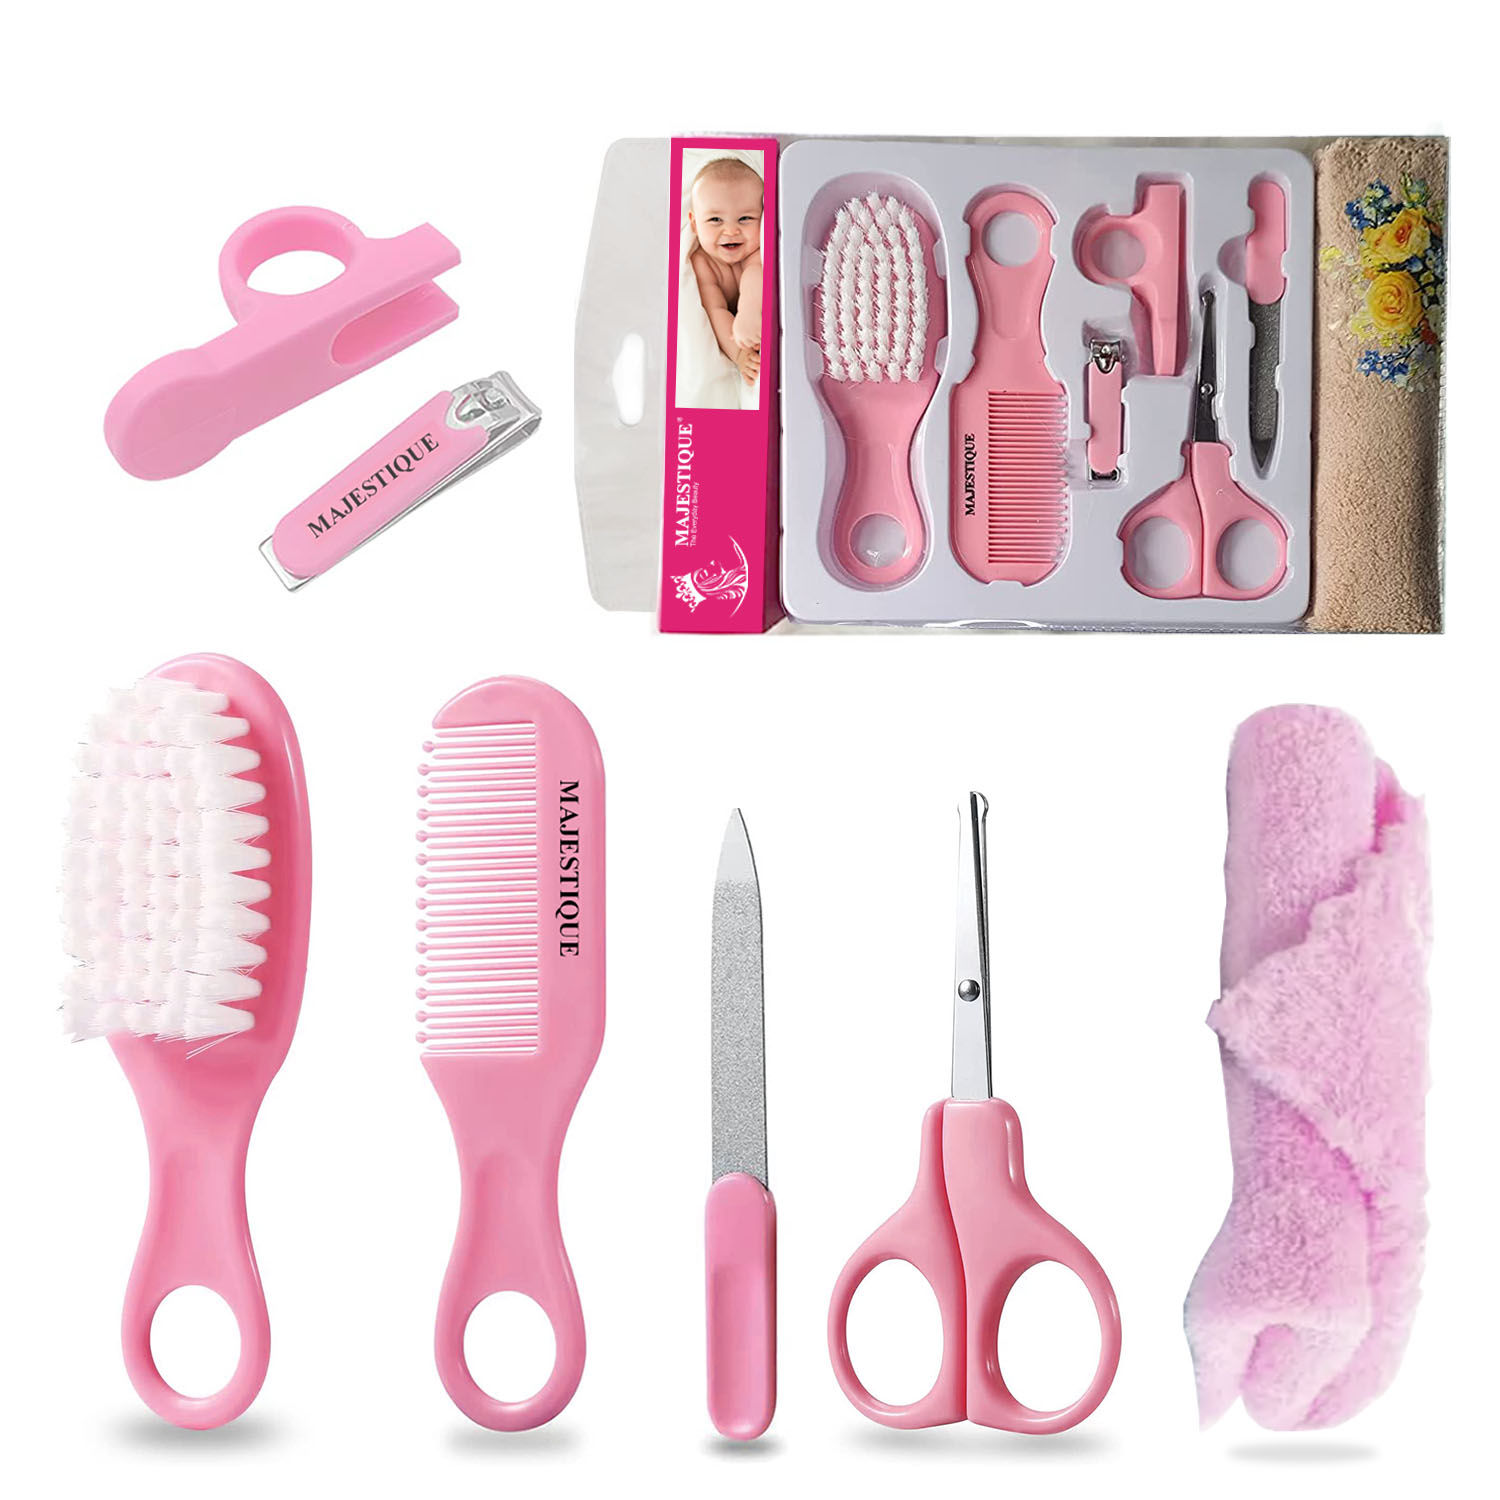 Amazoncom  On The Edge Baby Hair  Gentle Hair Brush Styling Tool  DoubleSided Hair Edge Brush Baby Hair Brush with a MultiUse Pointed End  Edge Comb Alternative Pink Paisley  Beauty